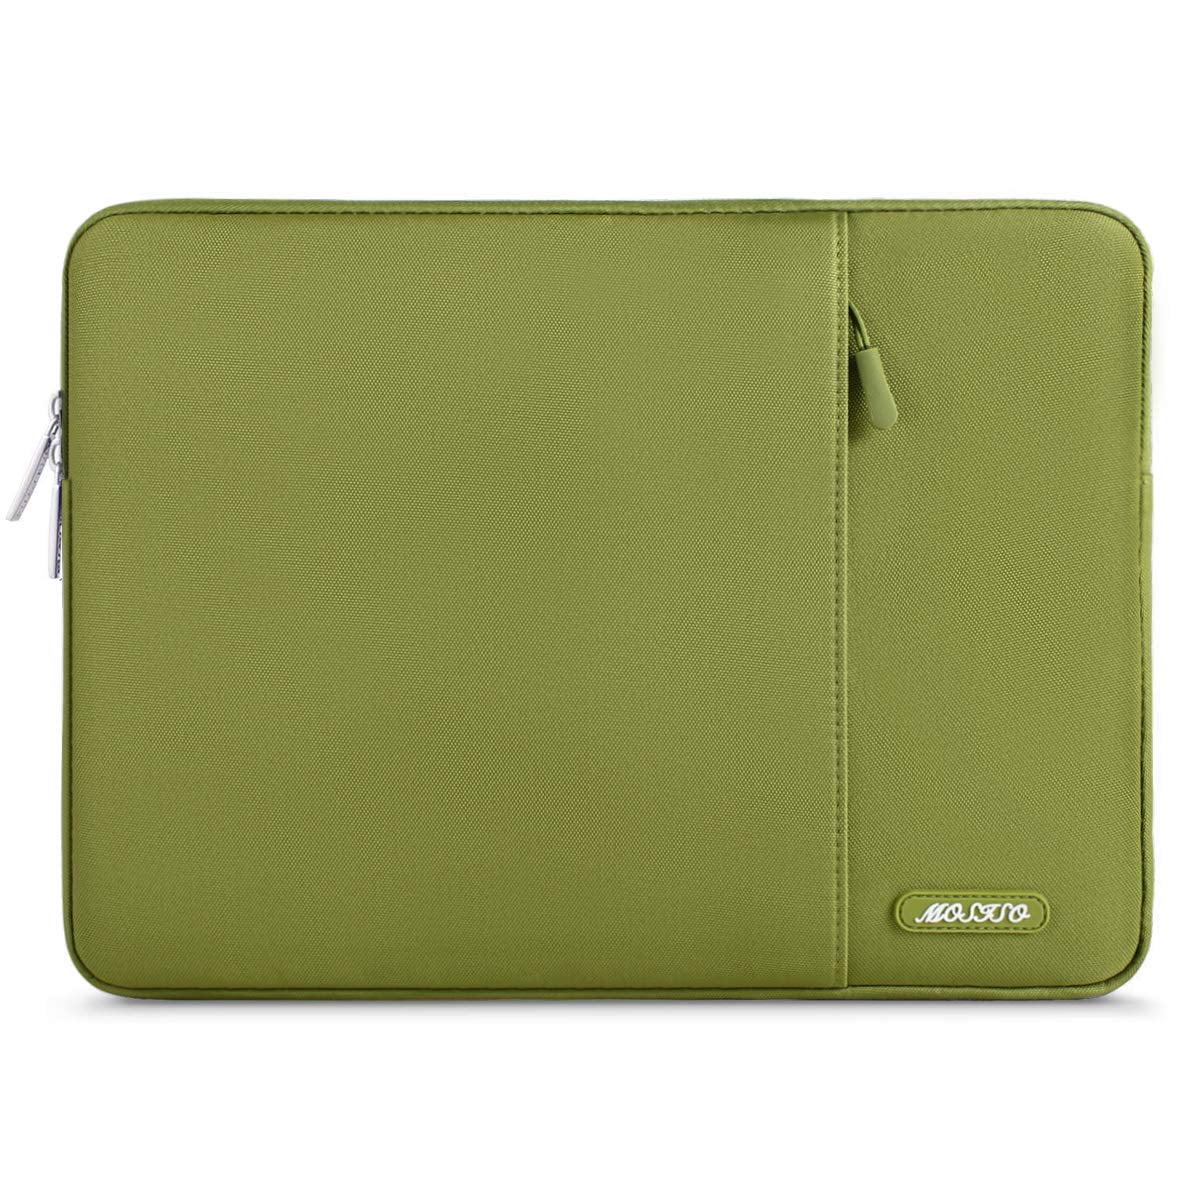 Ultrabook Netbook Tablet Carring Case Navy Blue MOSISO Polyester Fabric Sleeve Cover Laptop Shoulder Briefcase Bag Compatible with 13-13.3 Inch MacBook Air MacBook Pro